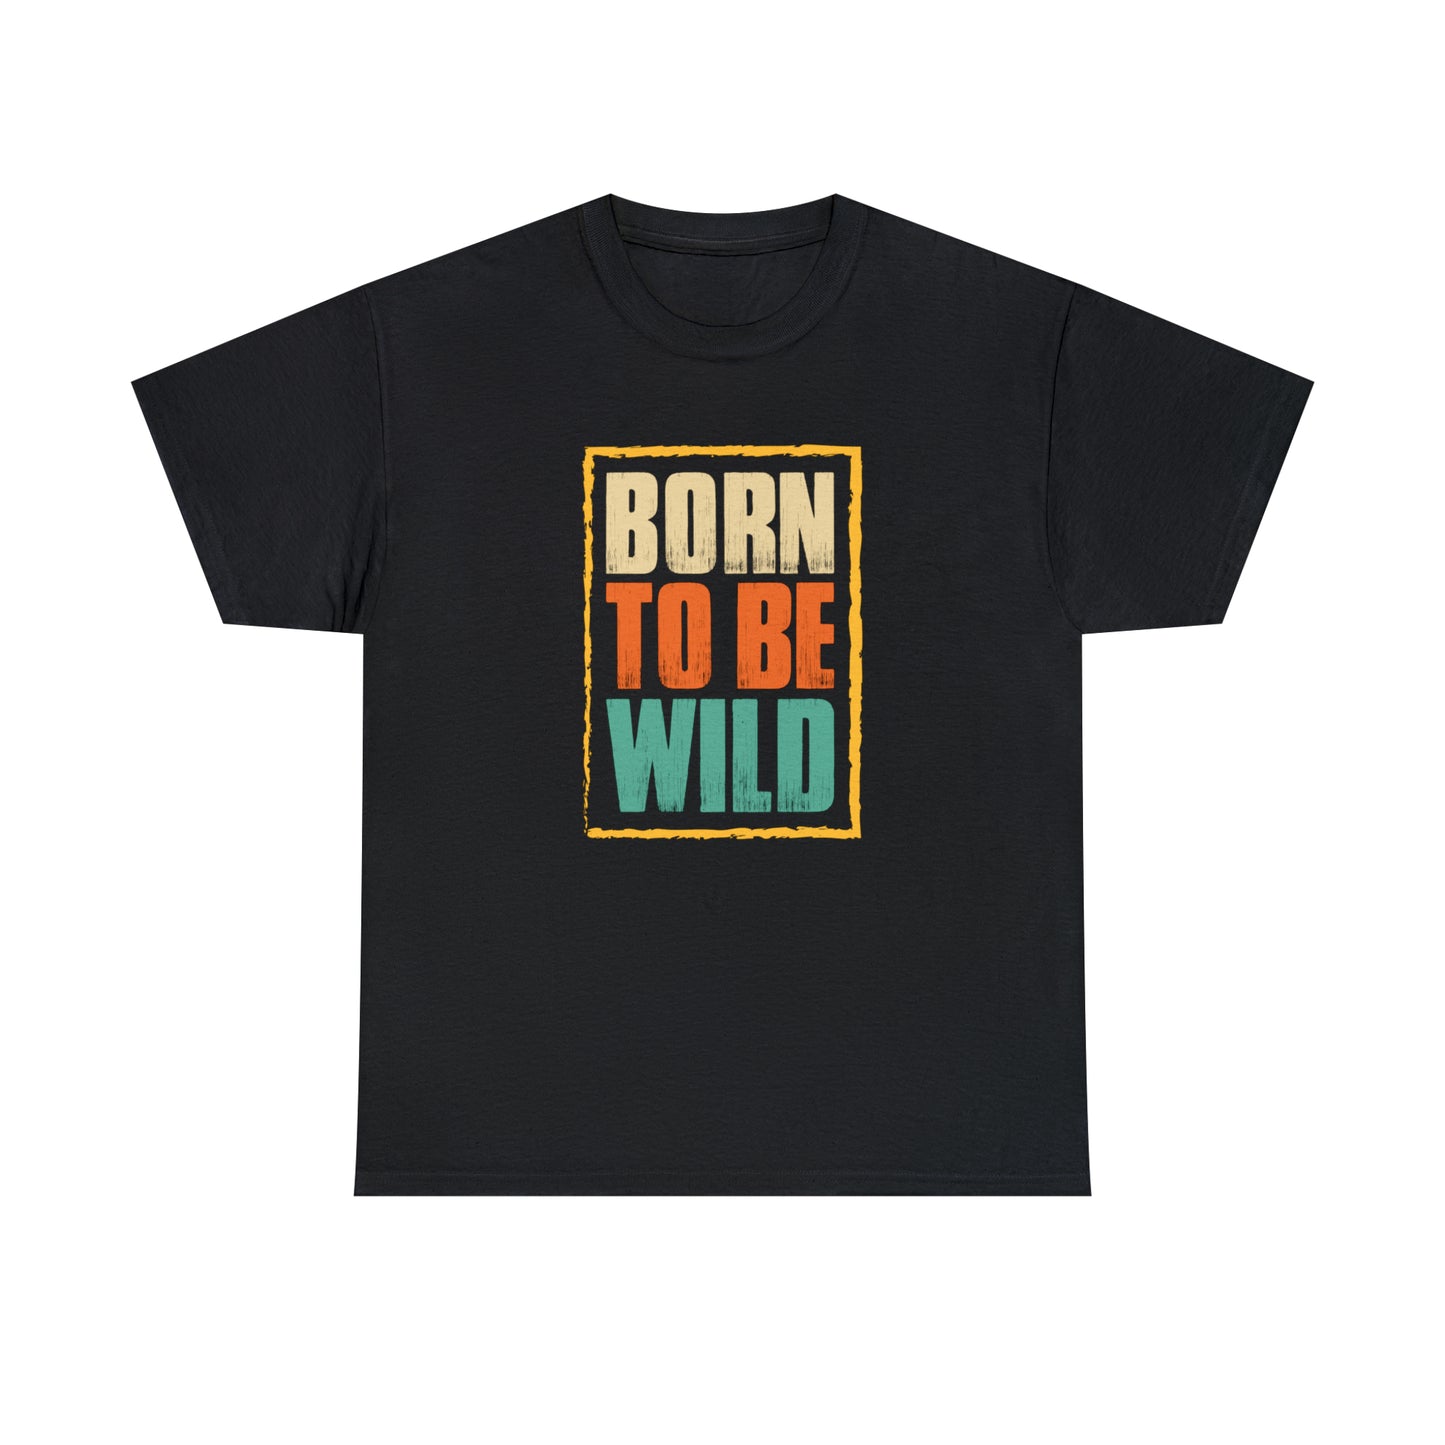 Born To Be Wild T-Shirt For Biker TShirt For Party T Shirt For Adventure Tee For Sports Gift